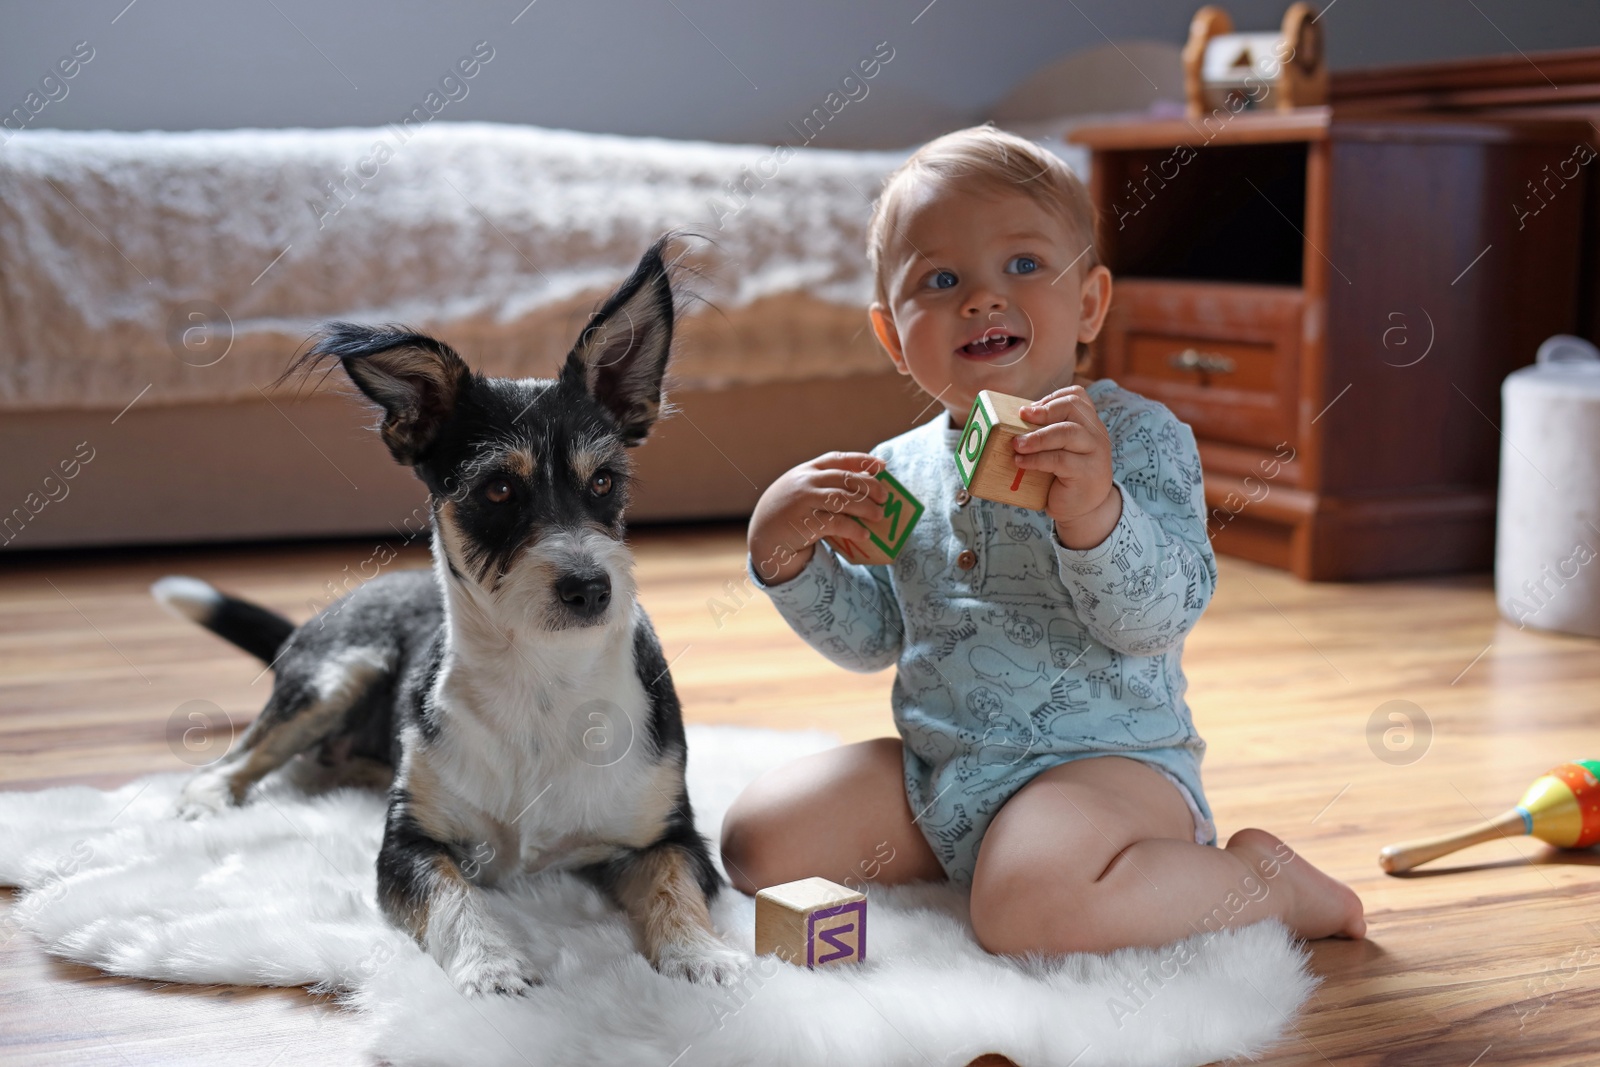 Photo of Adorable baby with toys and cute dog on faux fur rug at home